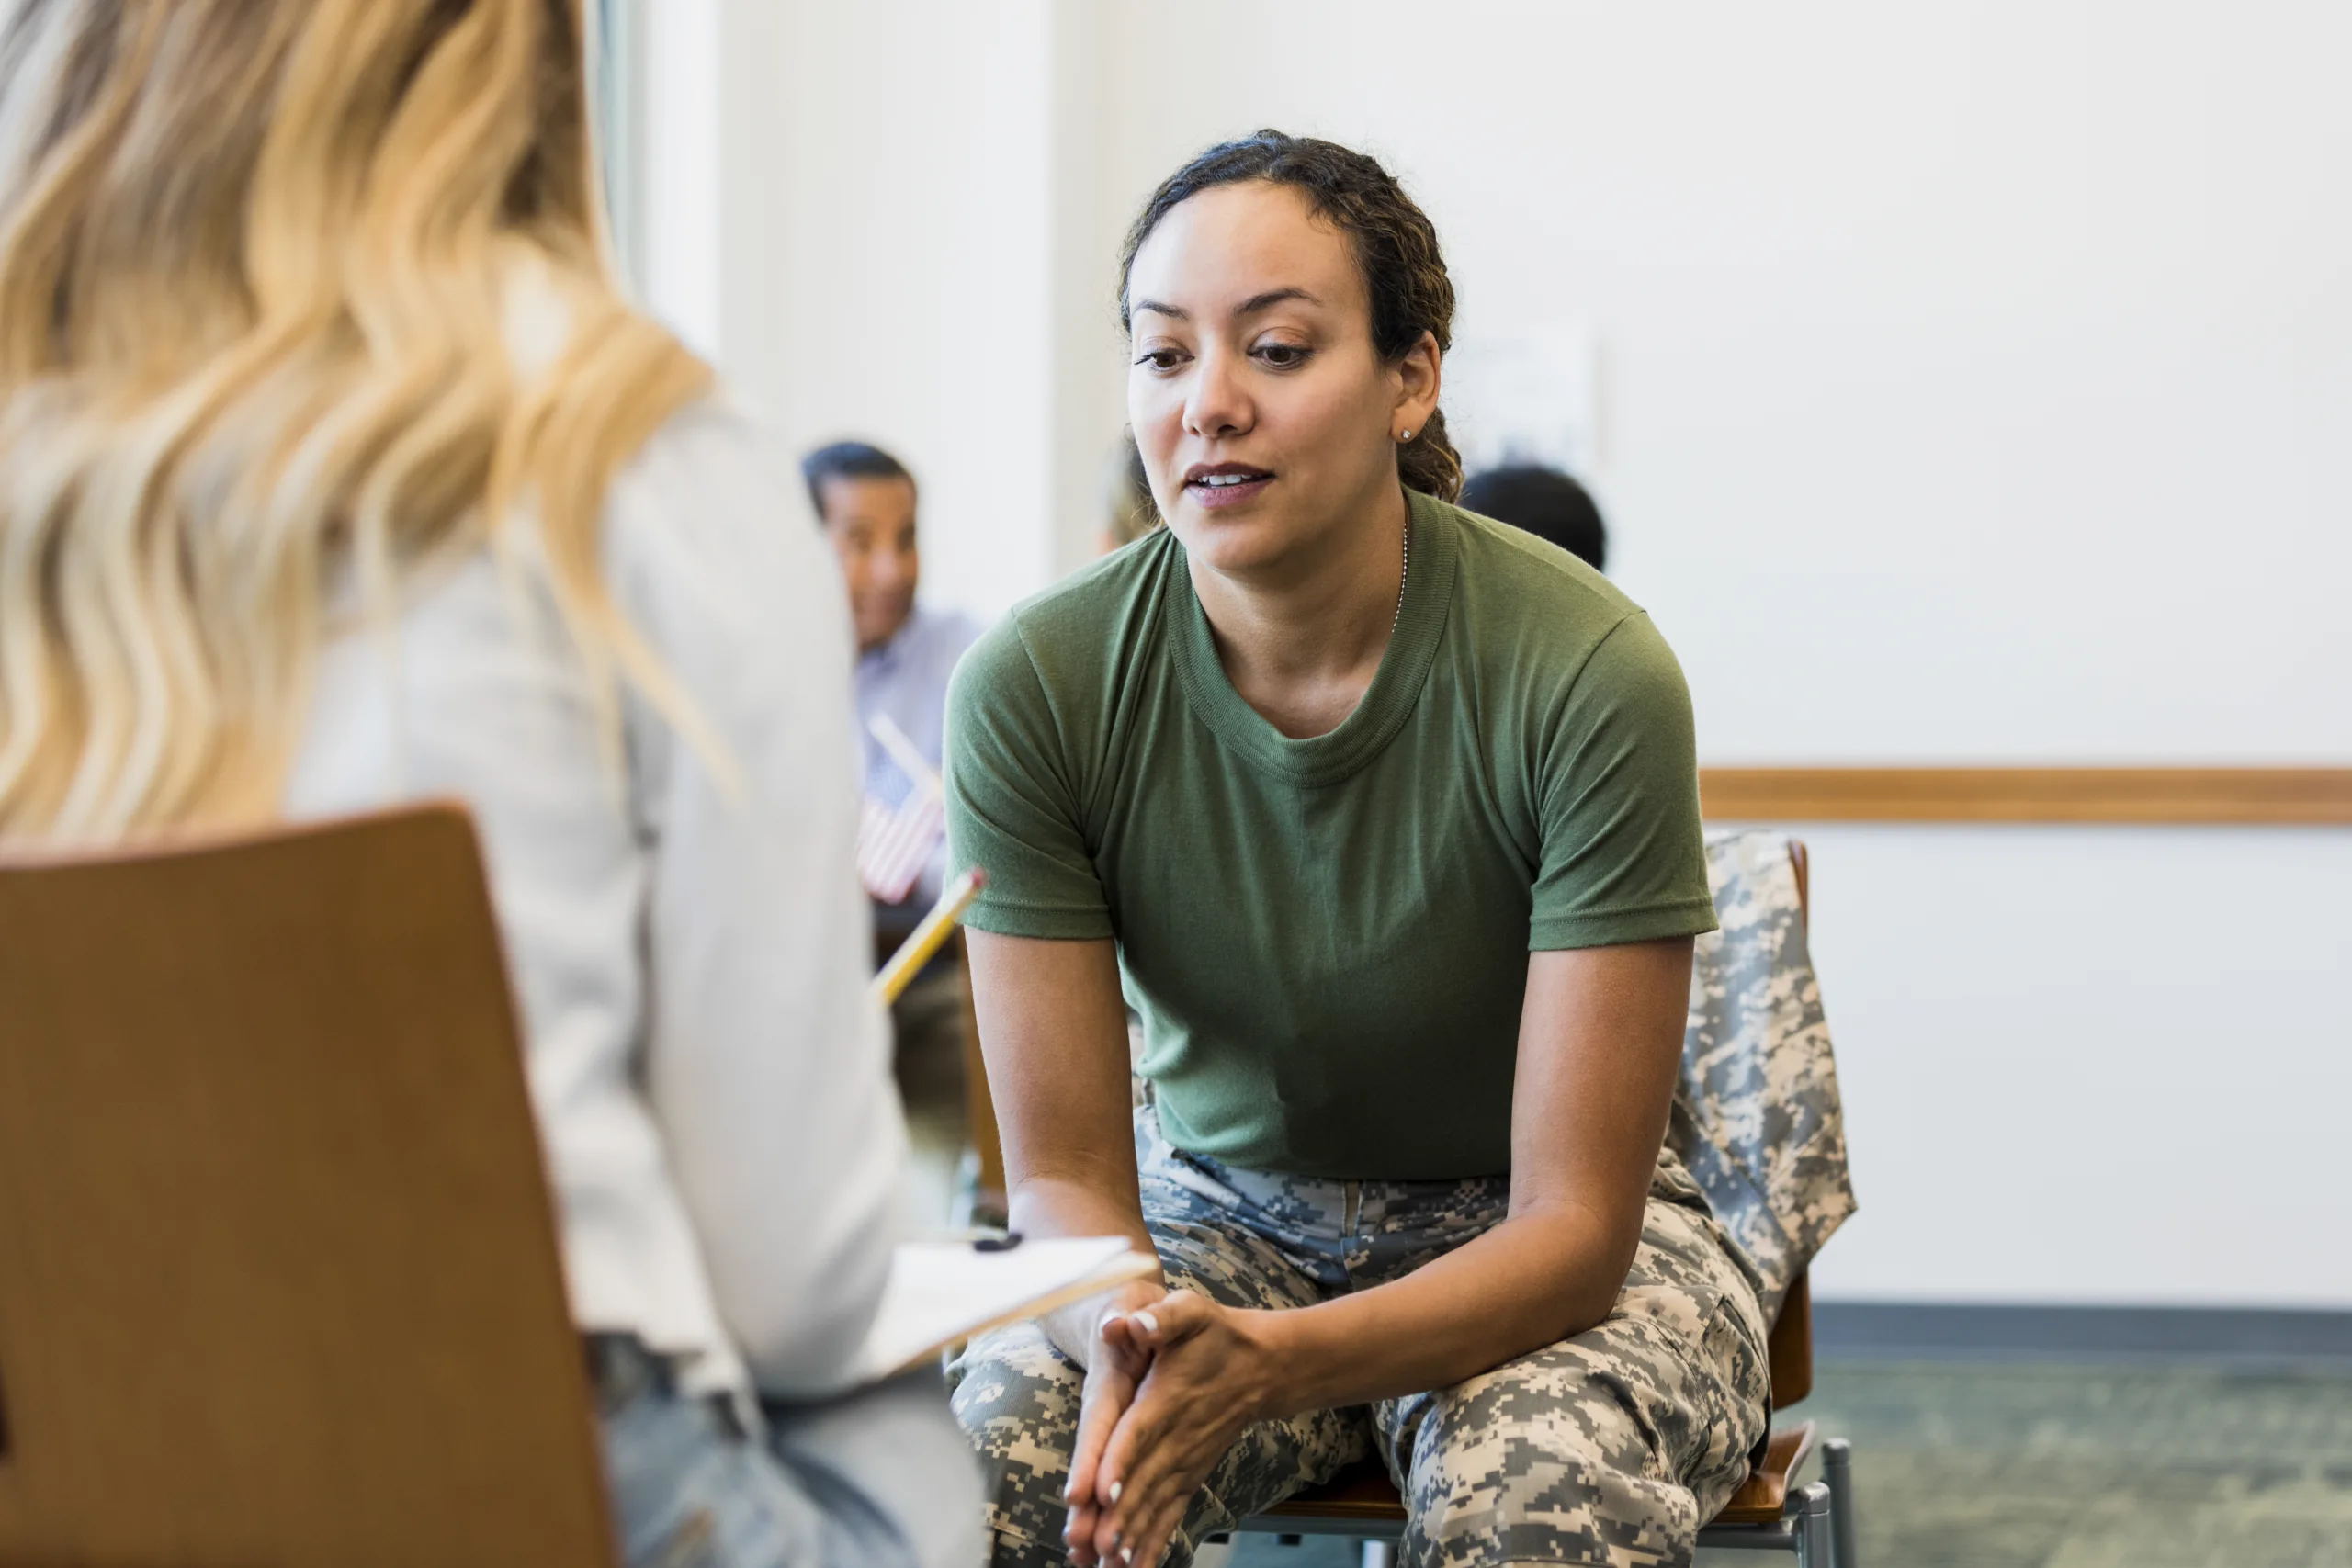 While at a counseling center for soldiers, a vulnerable female soldier discusses issues with a counselor.